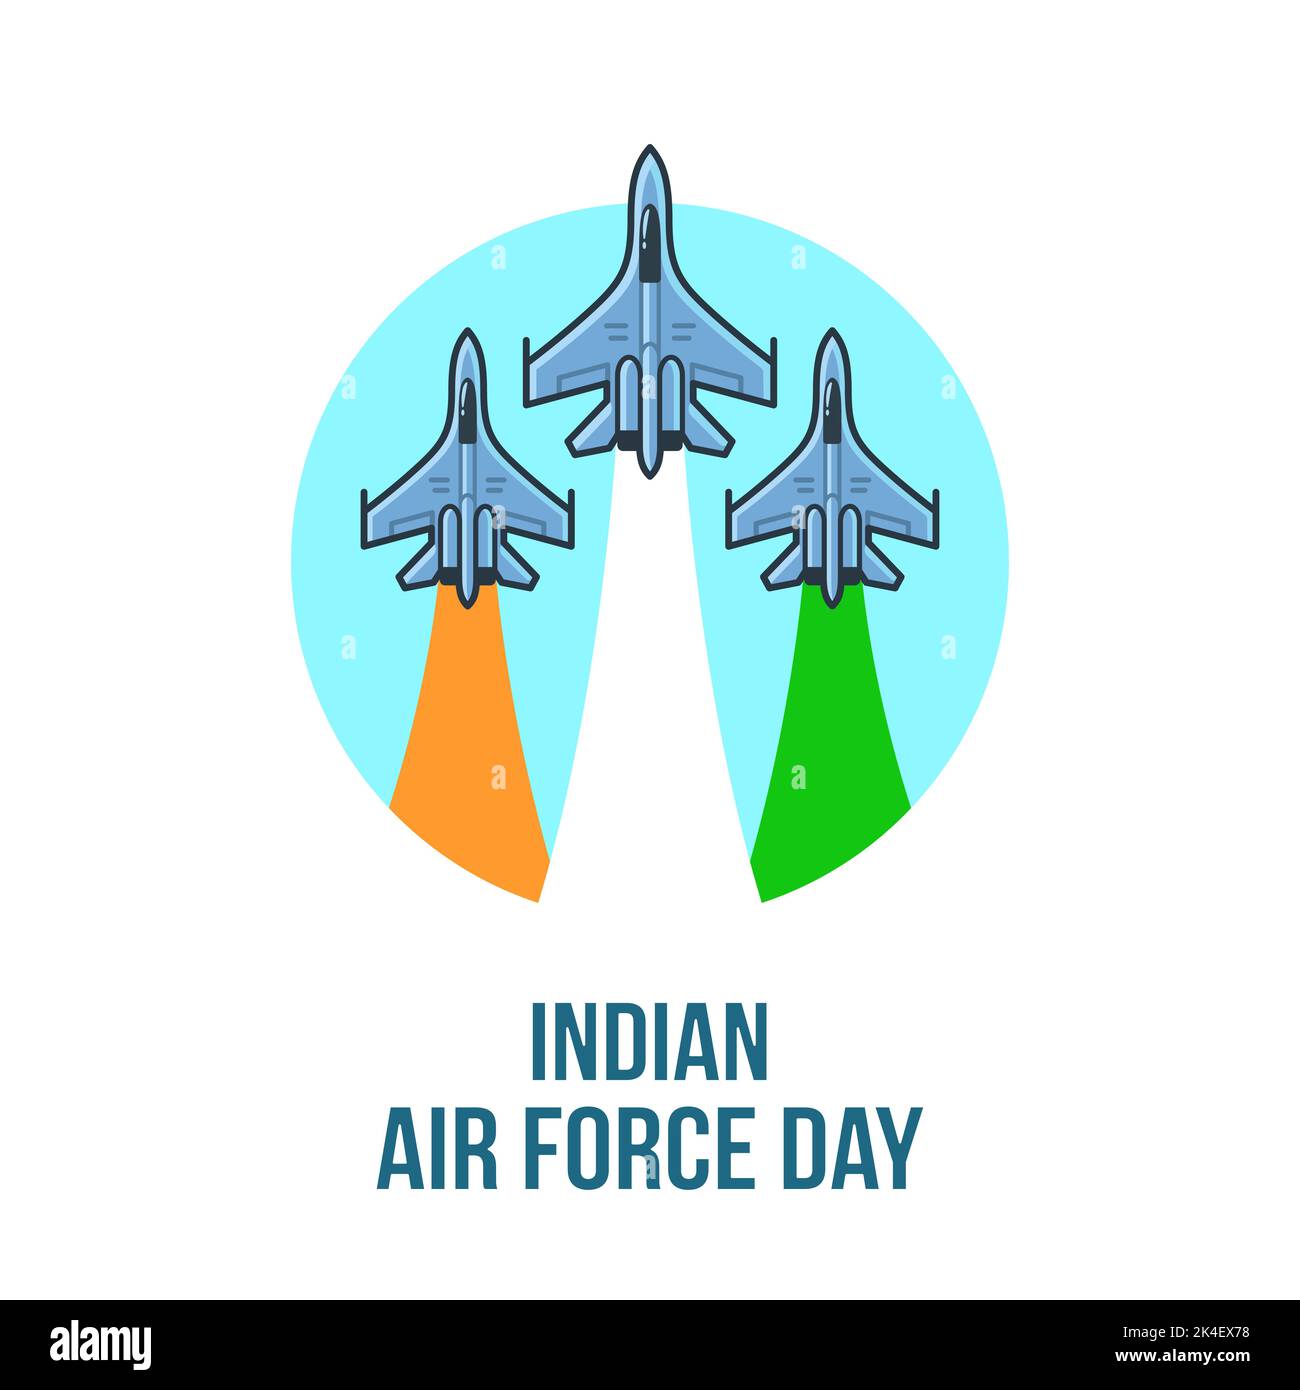 Indian Air Force Day celebration design. Three fighter jets with trails in Indian flag colors. Flat line icon, vector illustration. Stock Vector